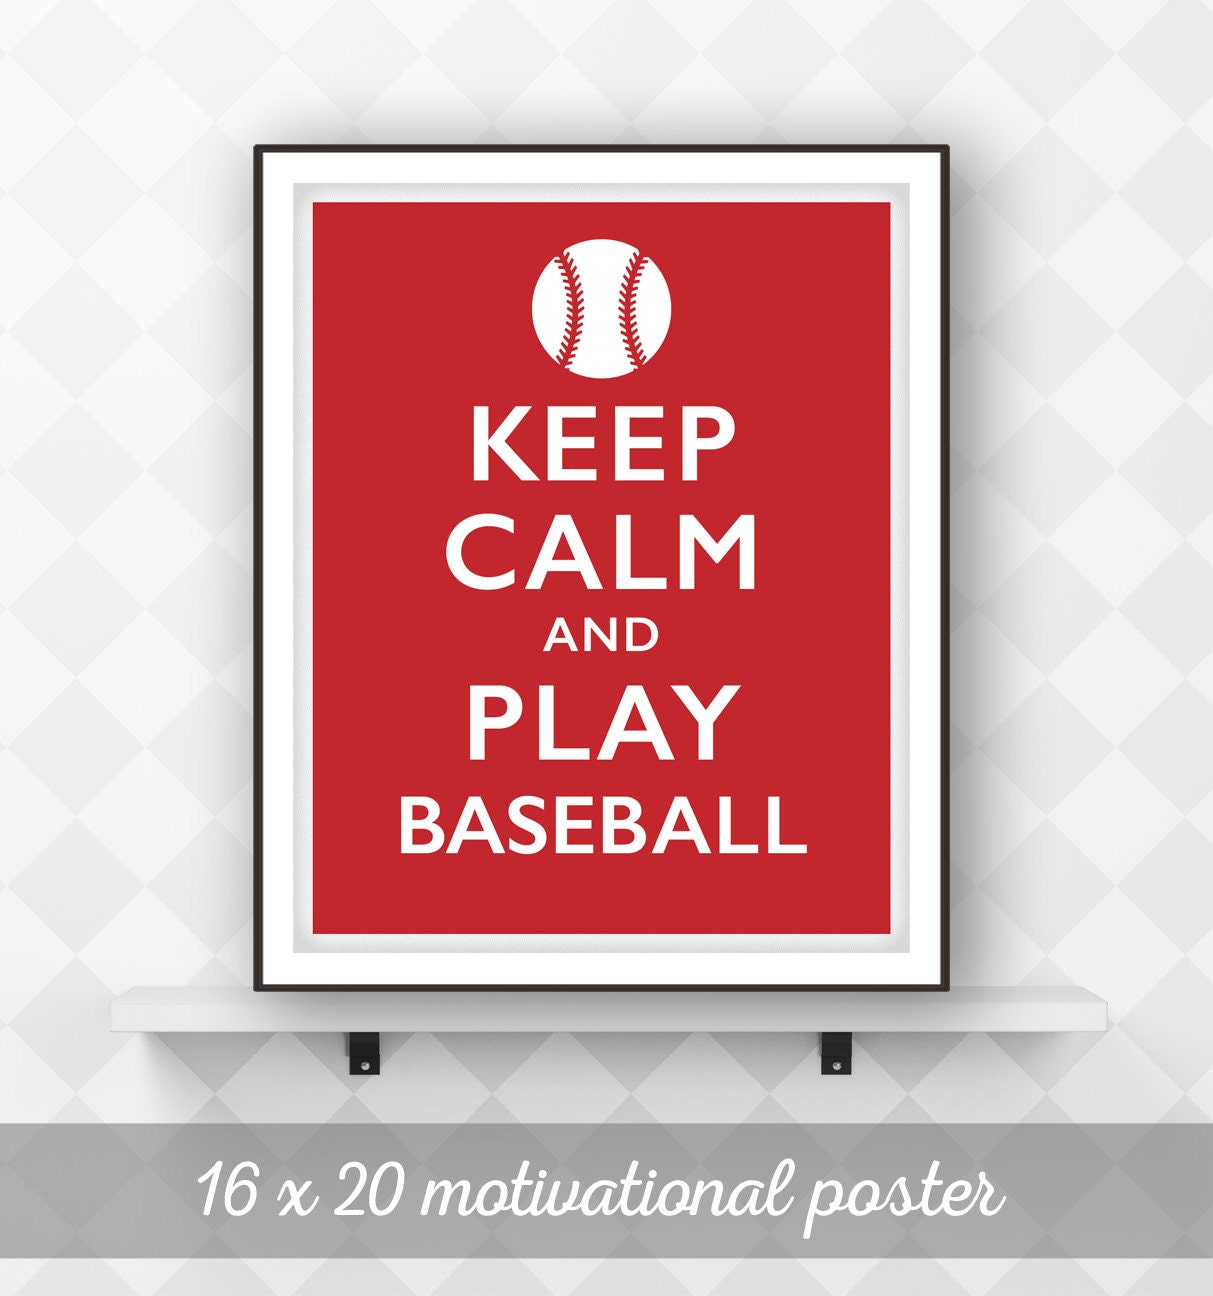 Keep Calm and Play Baseball Motivational Sports Poster